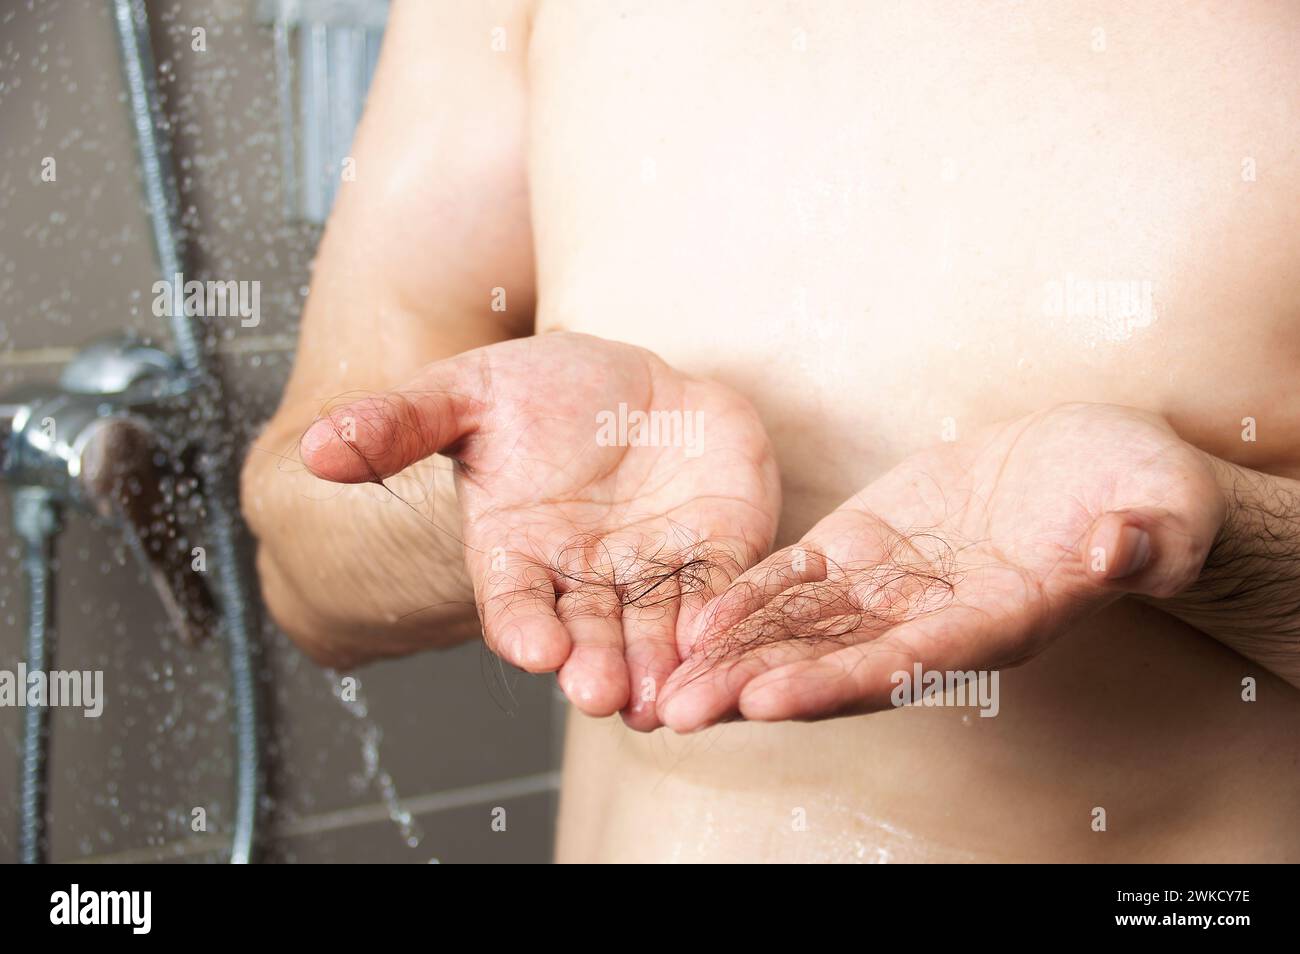 Close-up of a hands with hair from falling in the shower Stock Photo